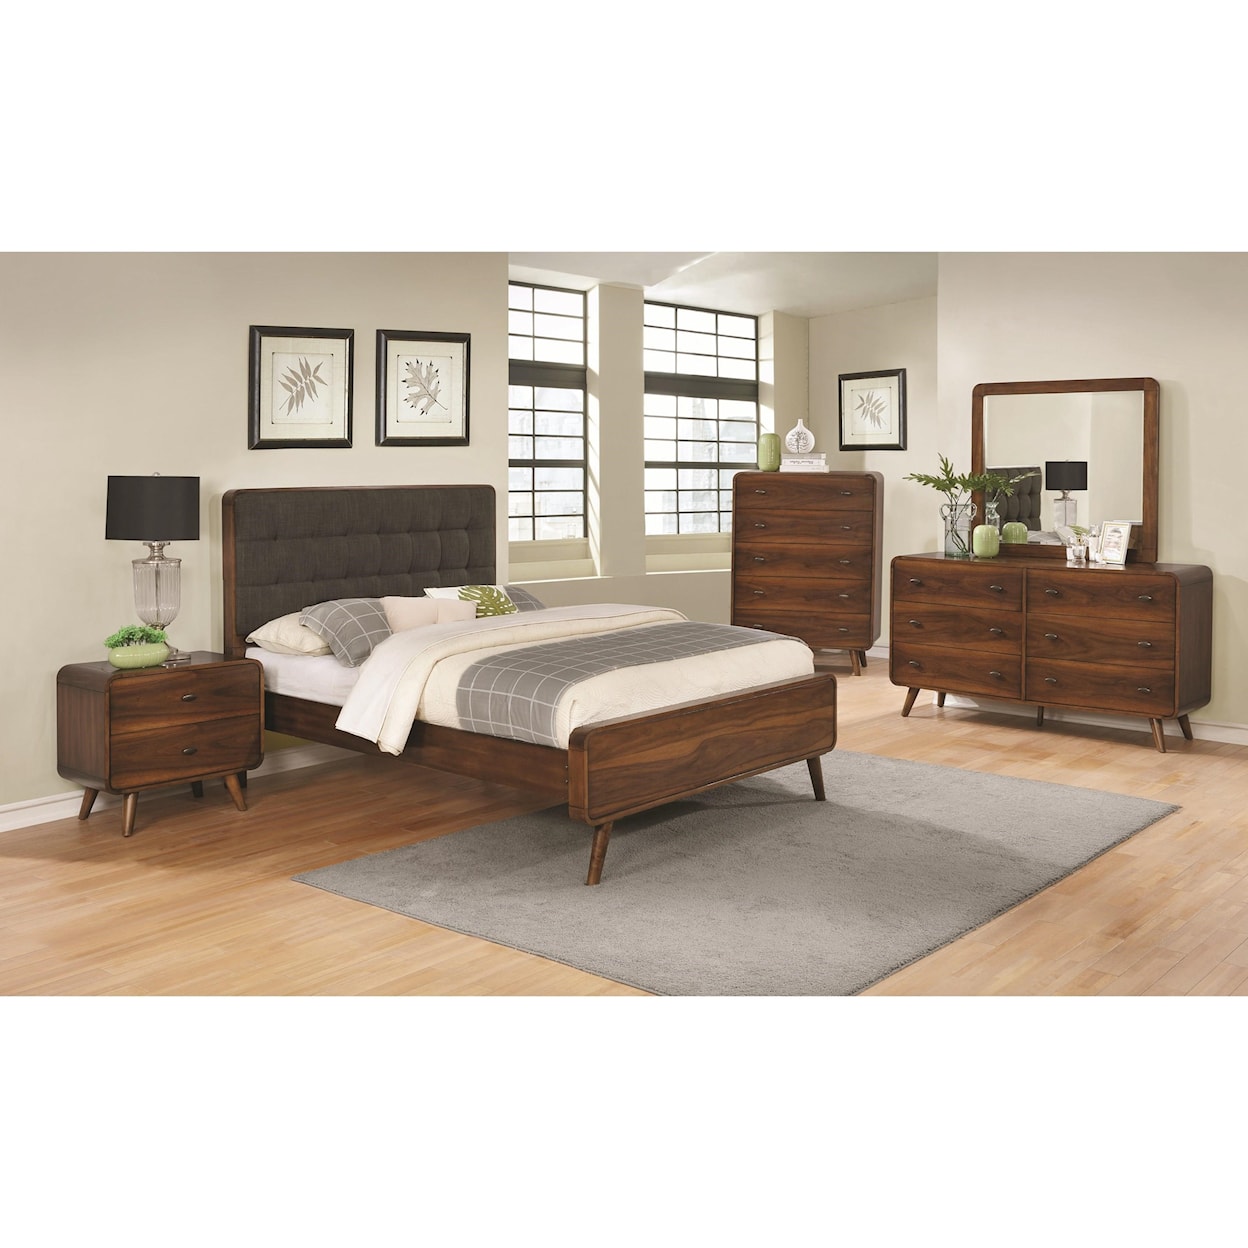 Coaster Robyn Queen Bed